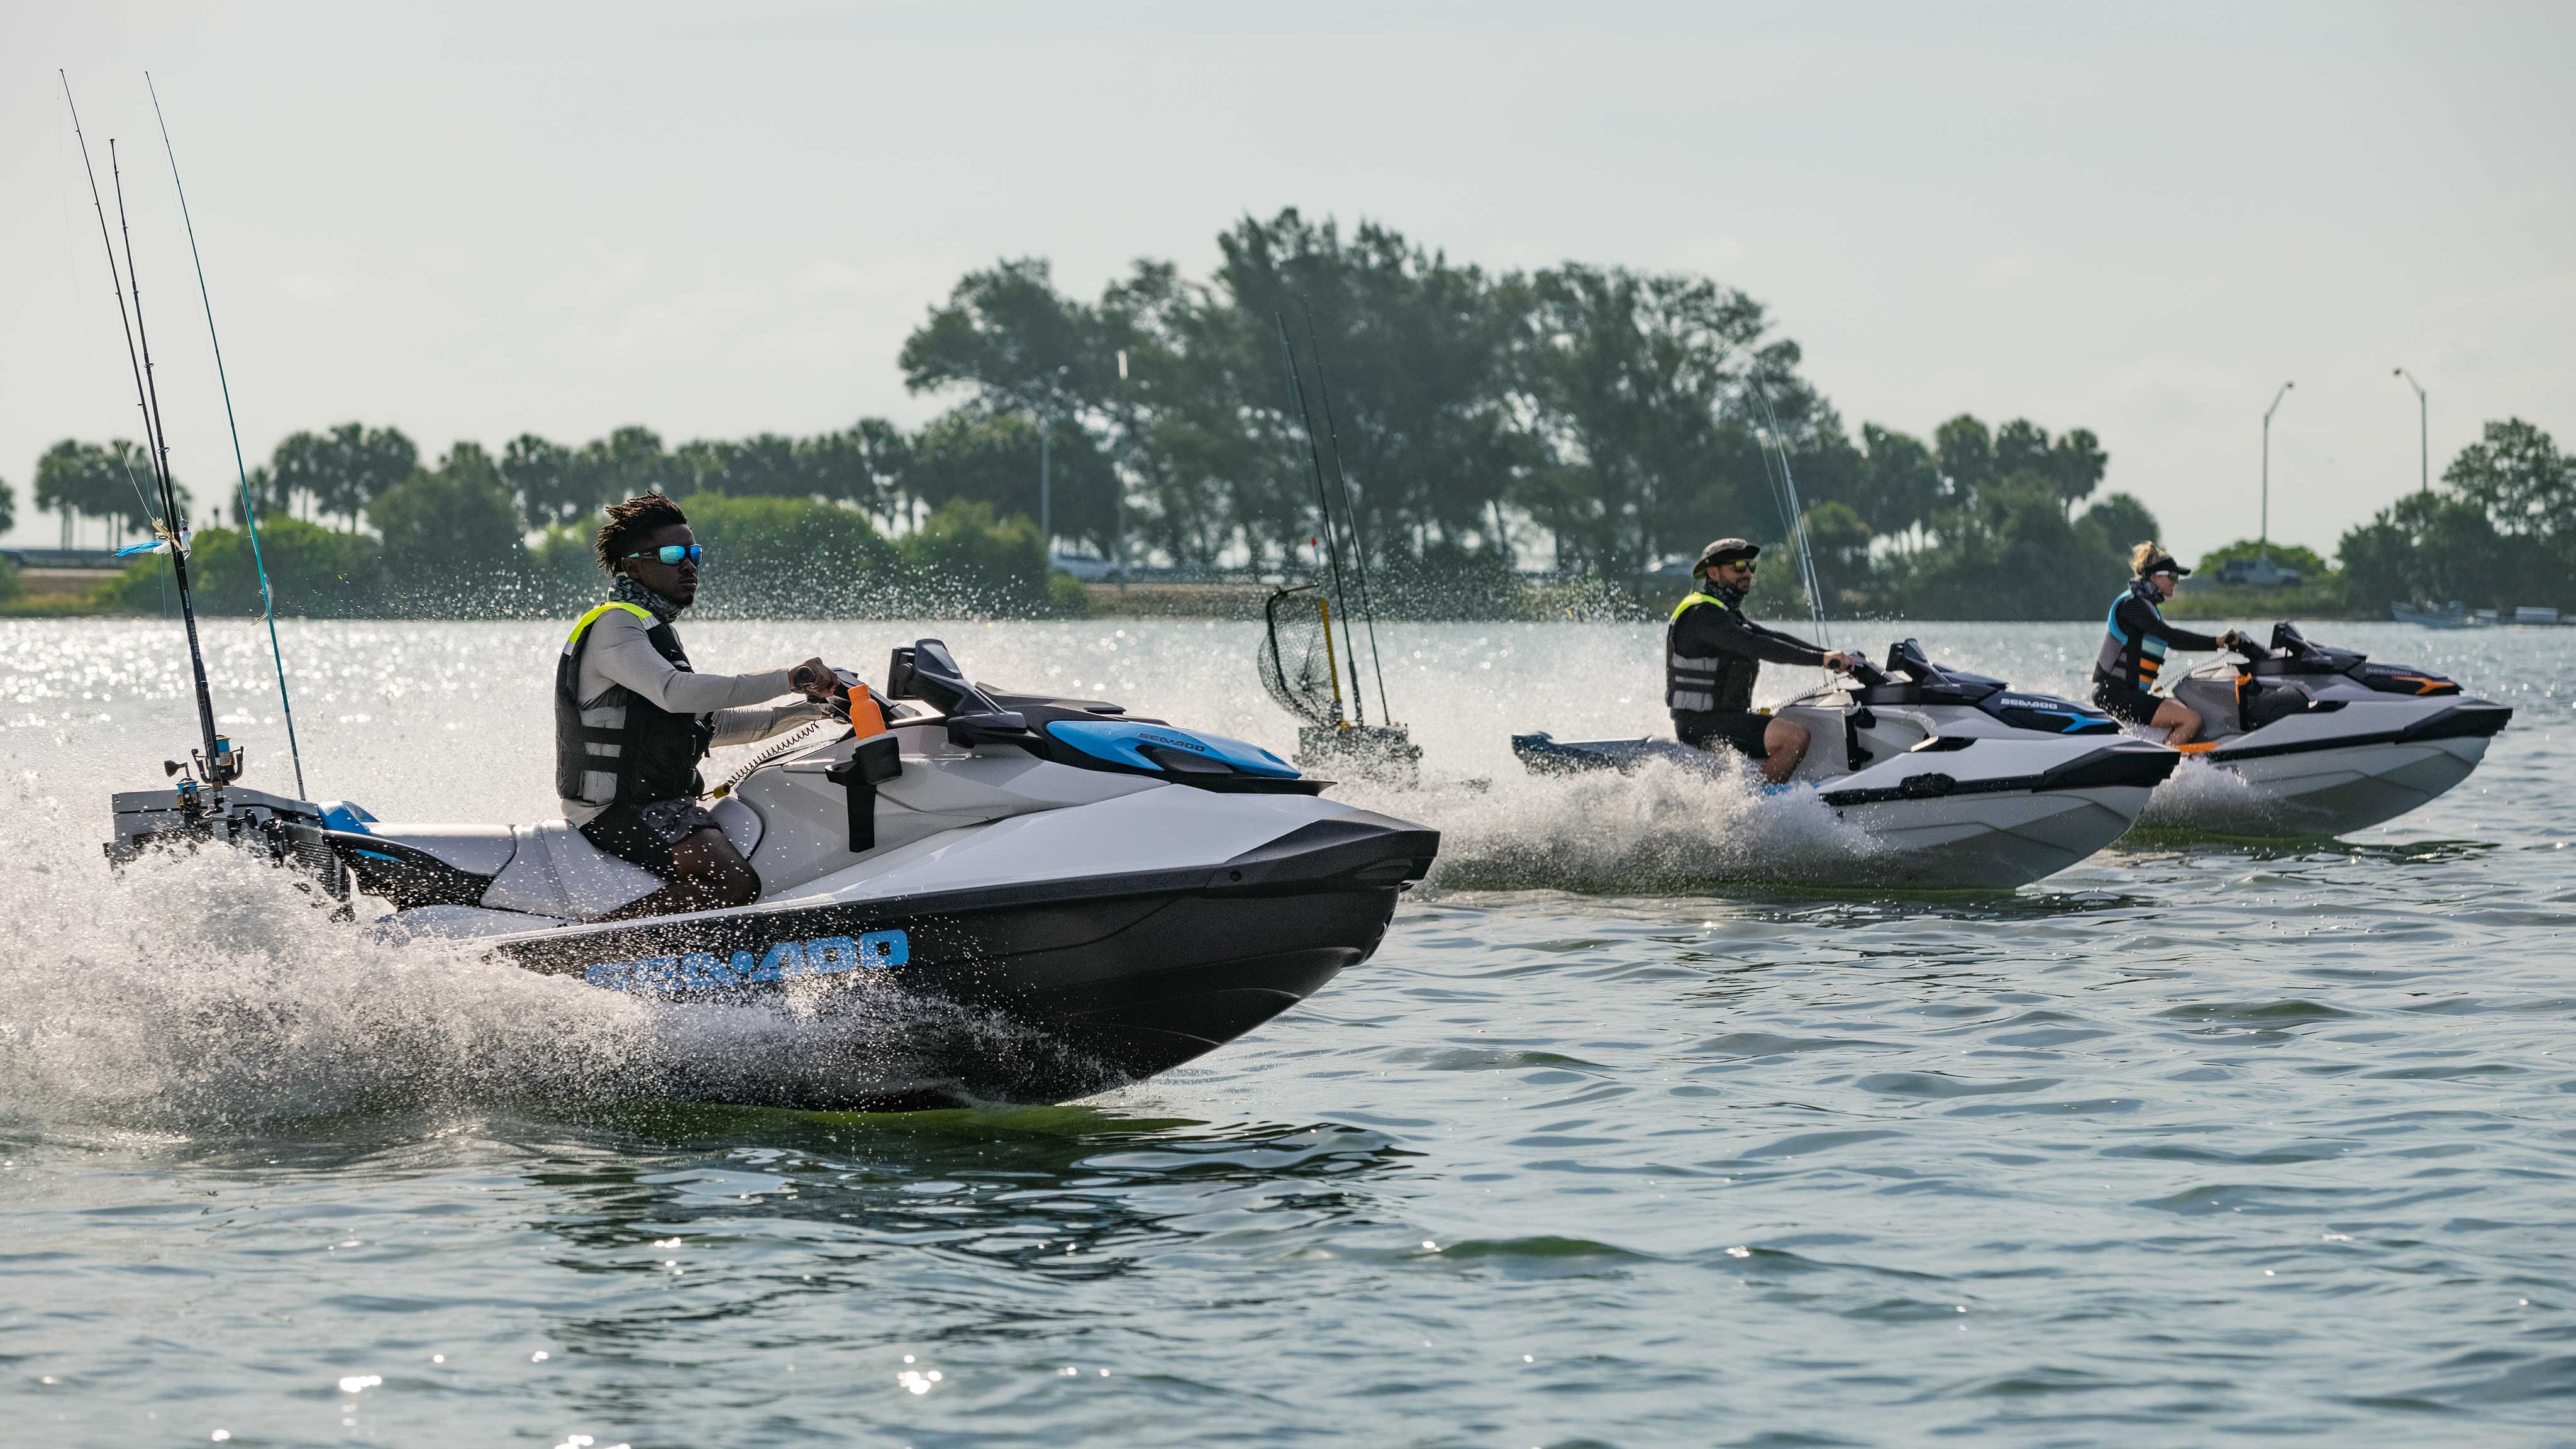 Group of riders on their 2022 Sea-Doo FishPro